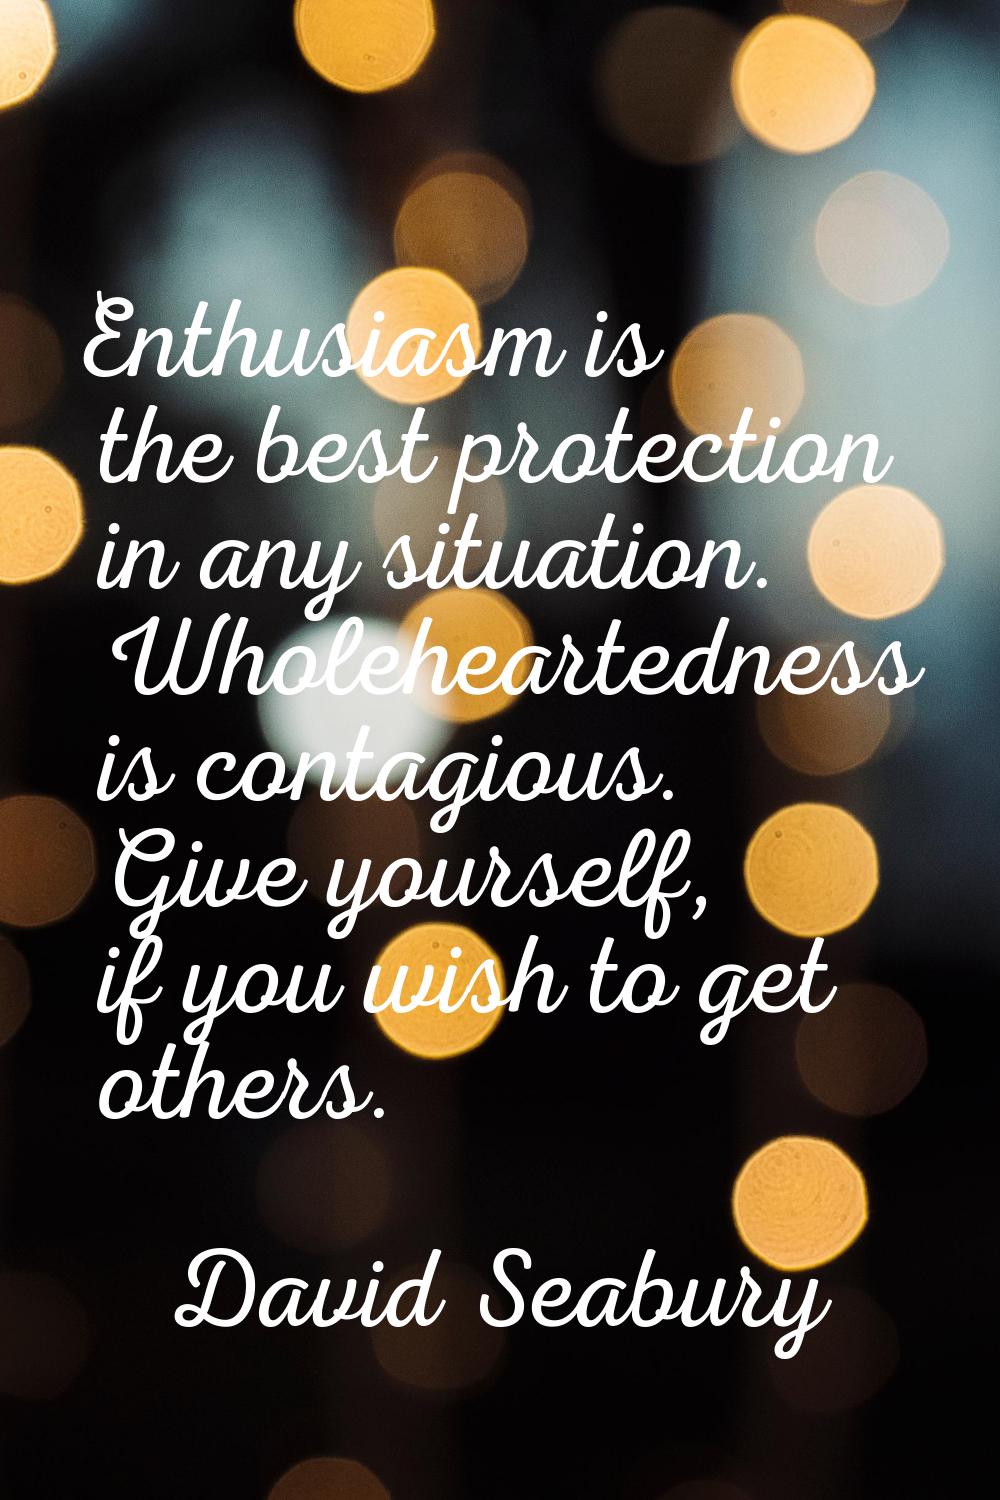 Enthusiasm is the best protection in any situation. Wholeheartedness is contagious. Give yourself, 